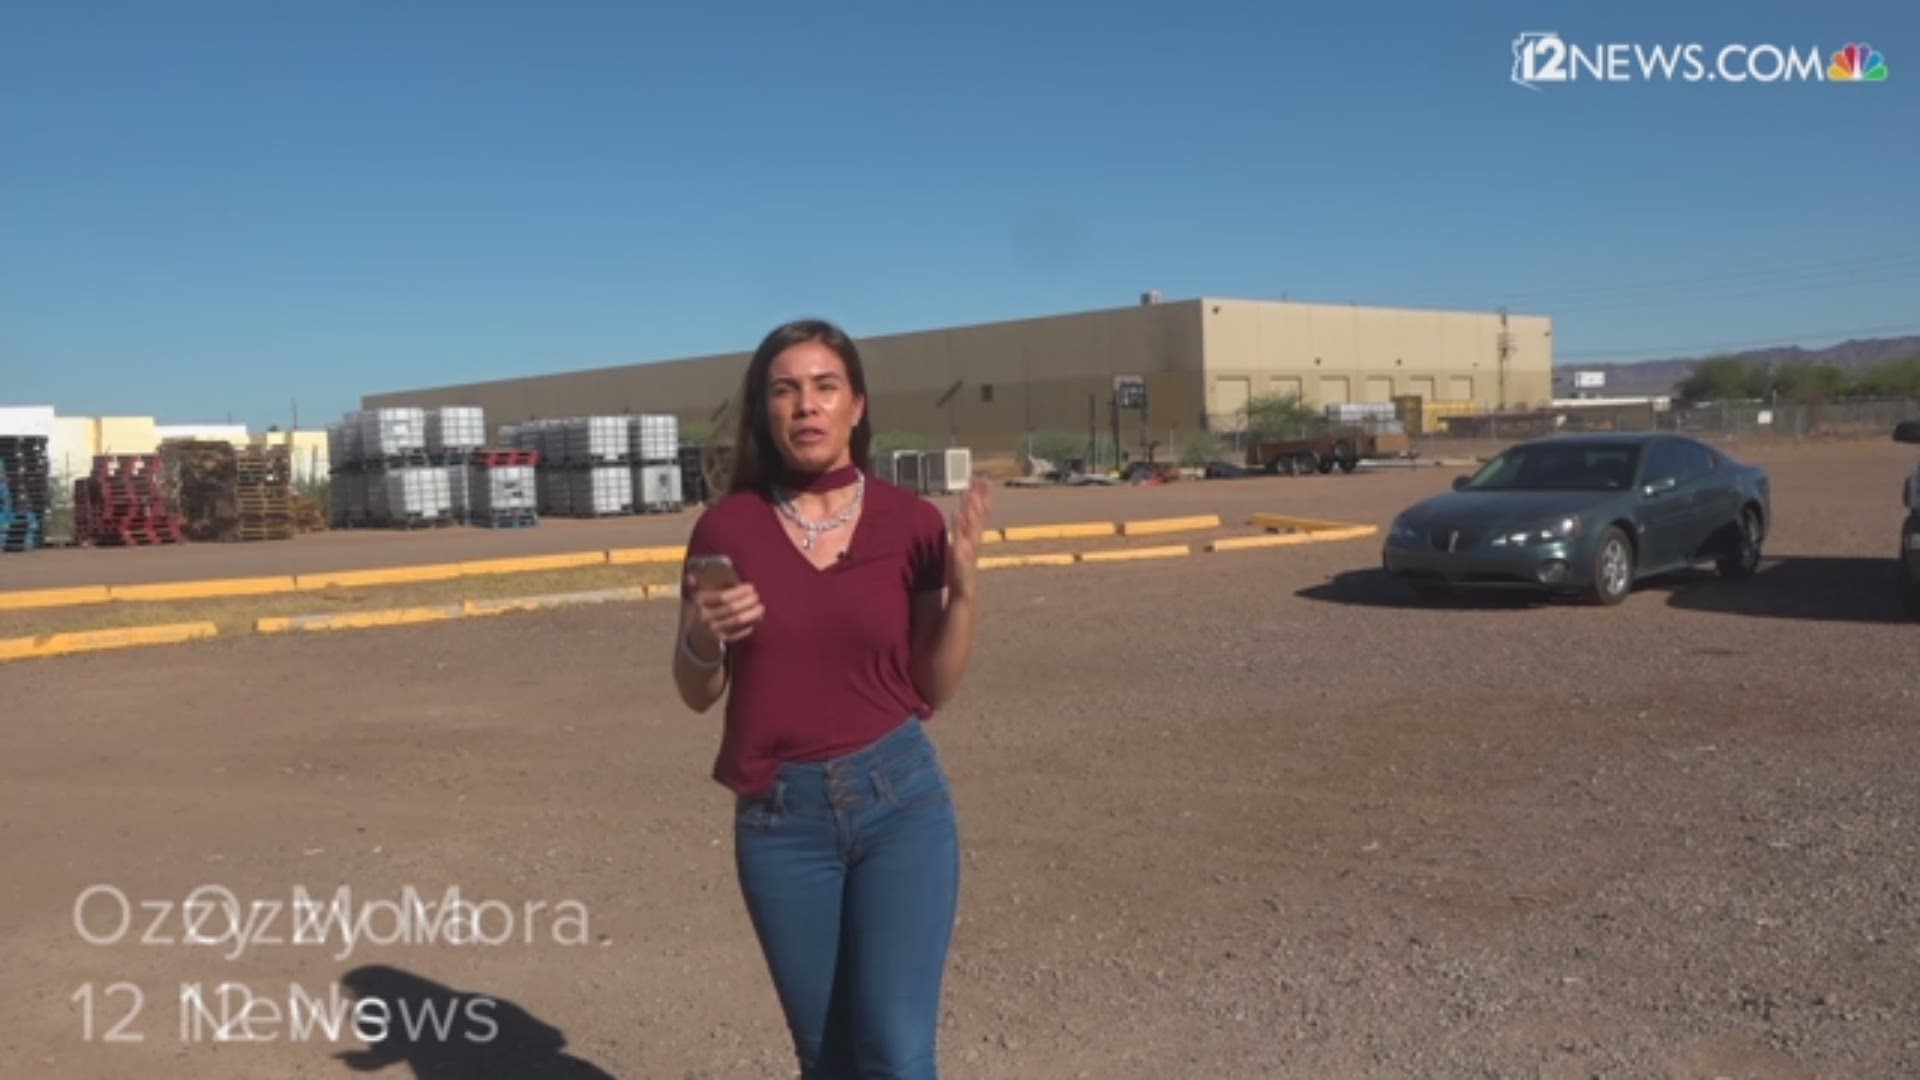 Phoenix Rescue Mission says Hispanics, Latinos could be key to helping their community needs